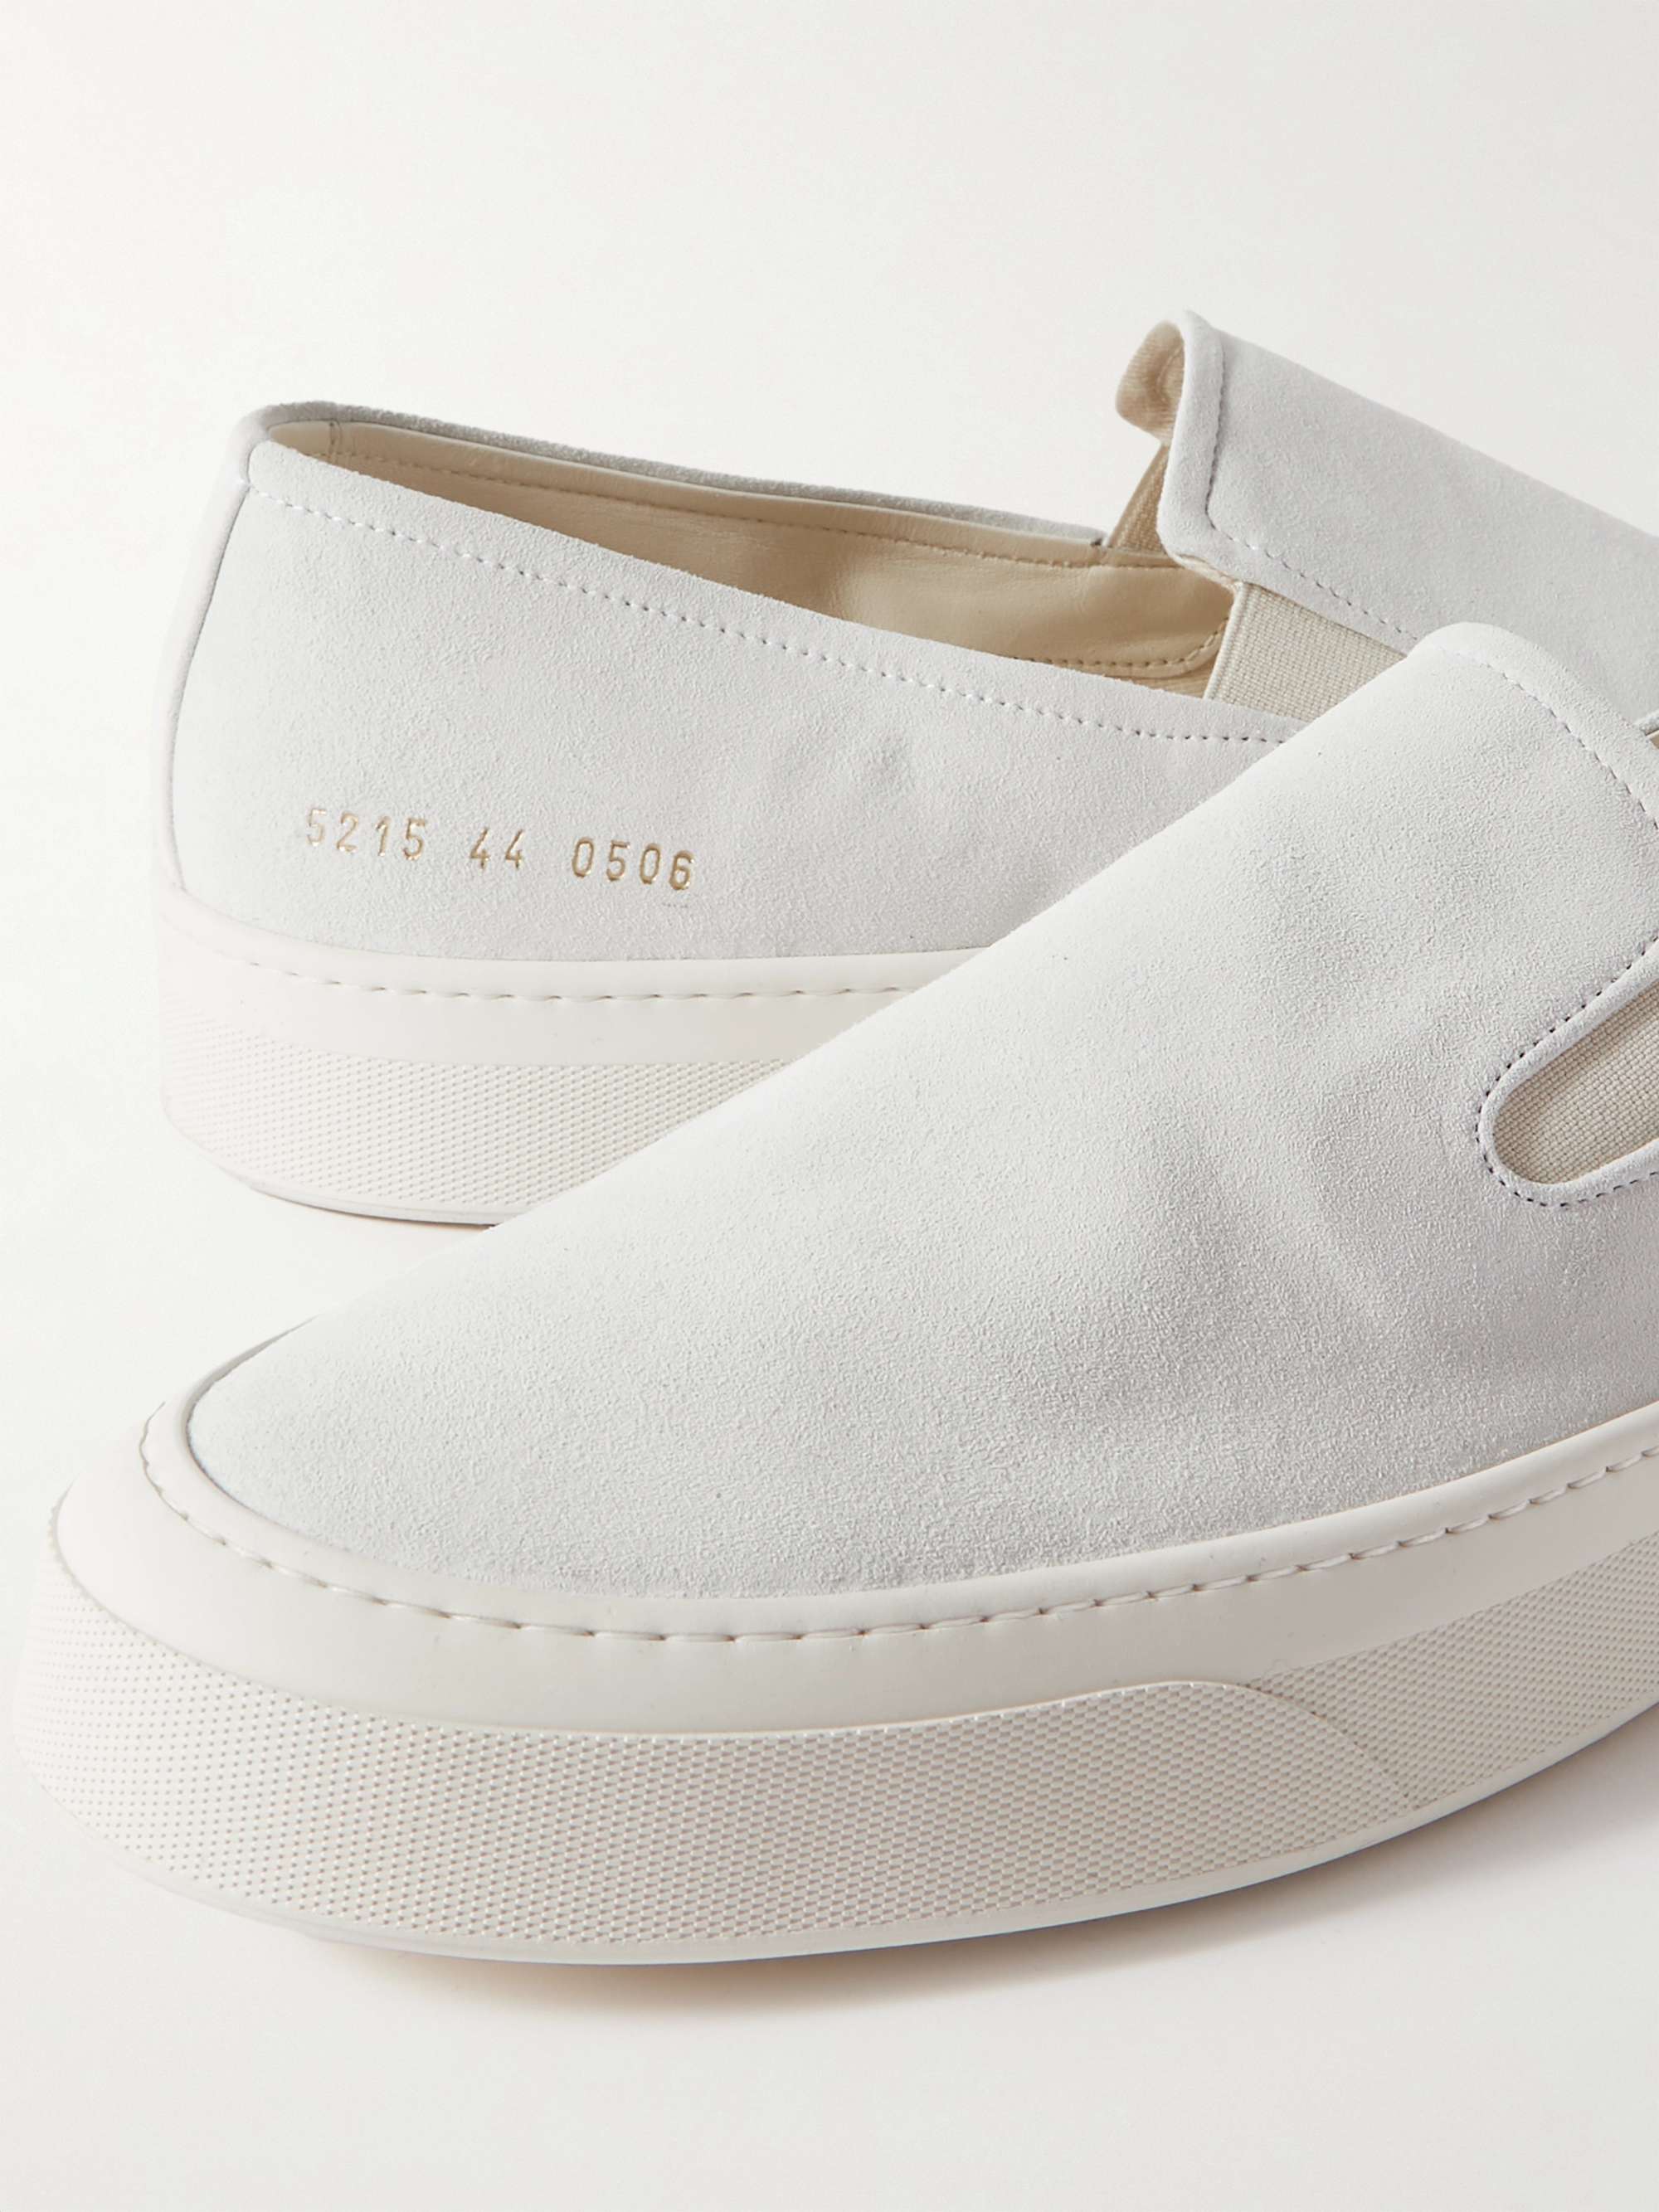 COMMON PROJECTS Suede Slip-On Sneakers